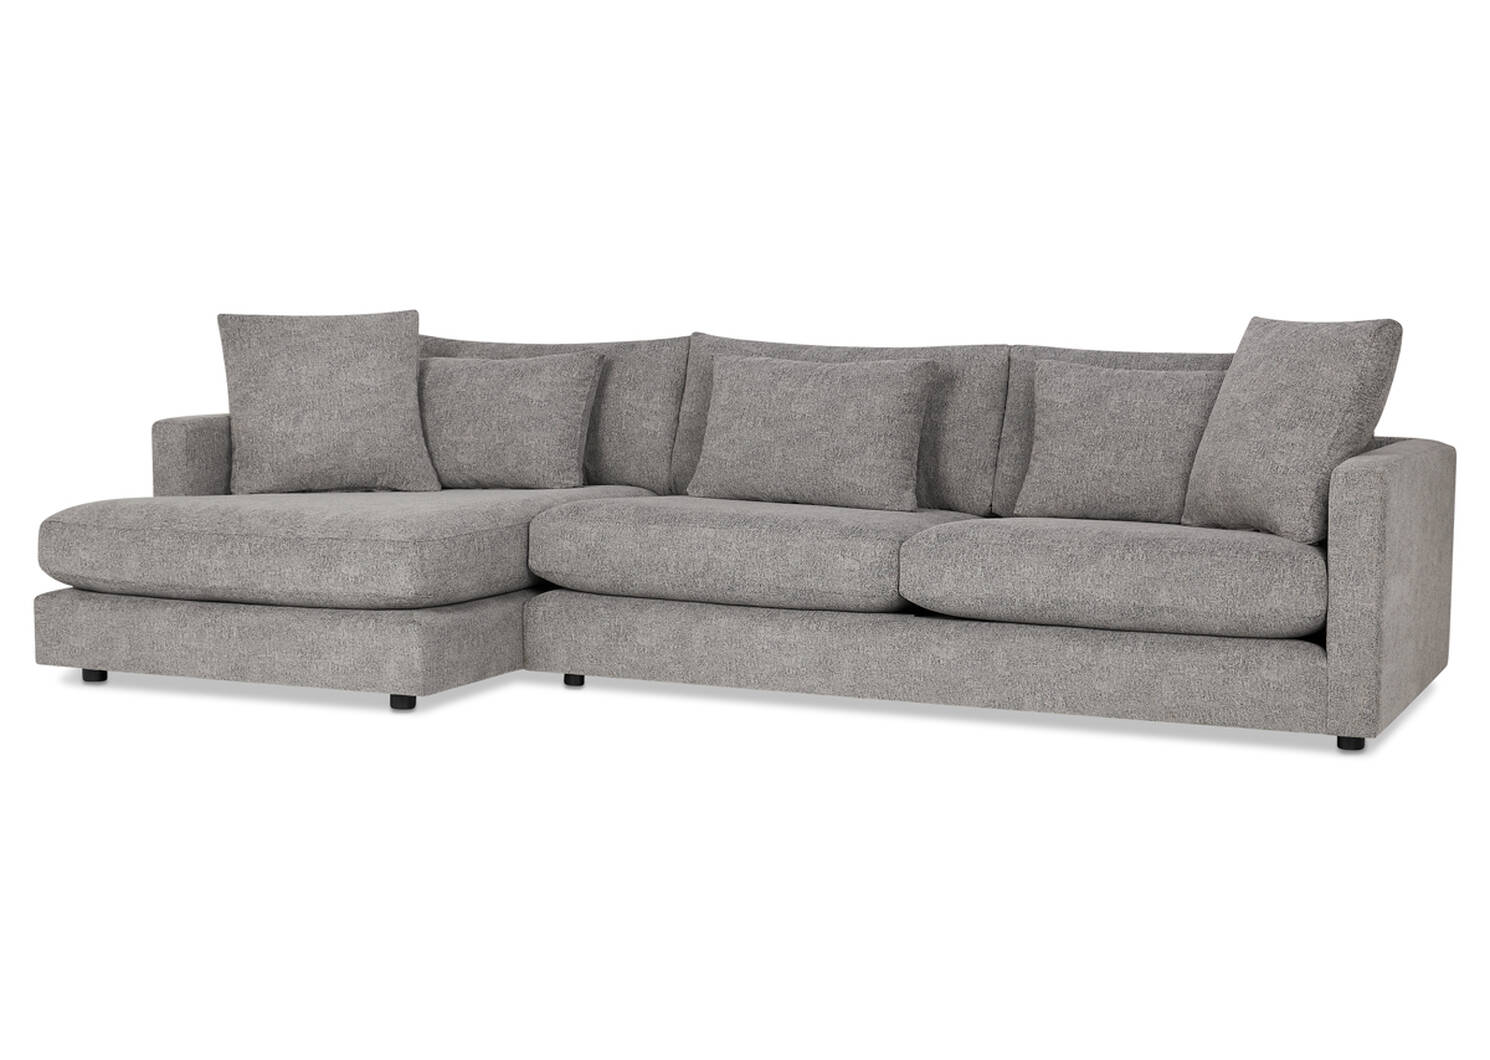 Berg Sofa Chaise -Aiden Sterling